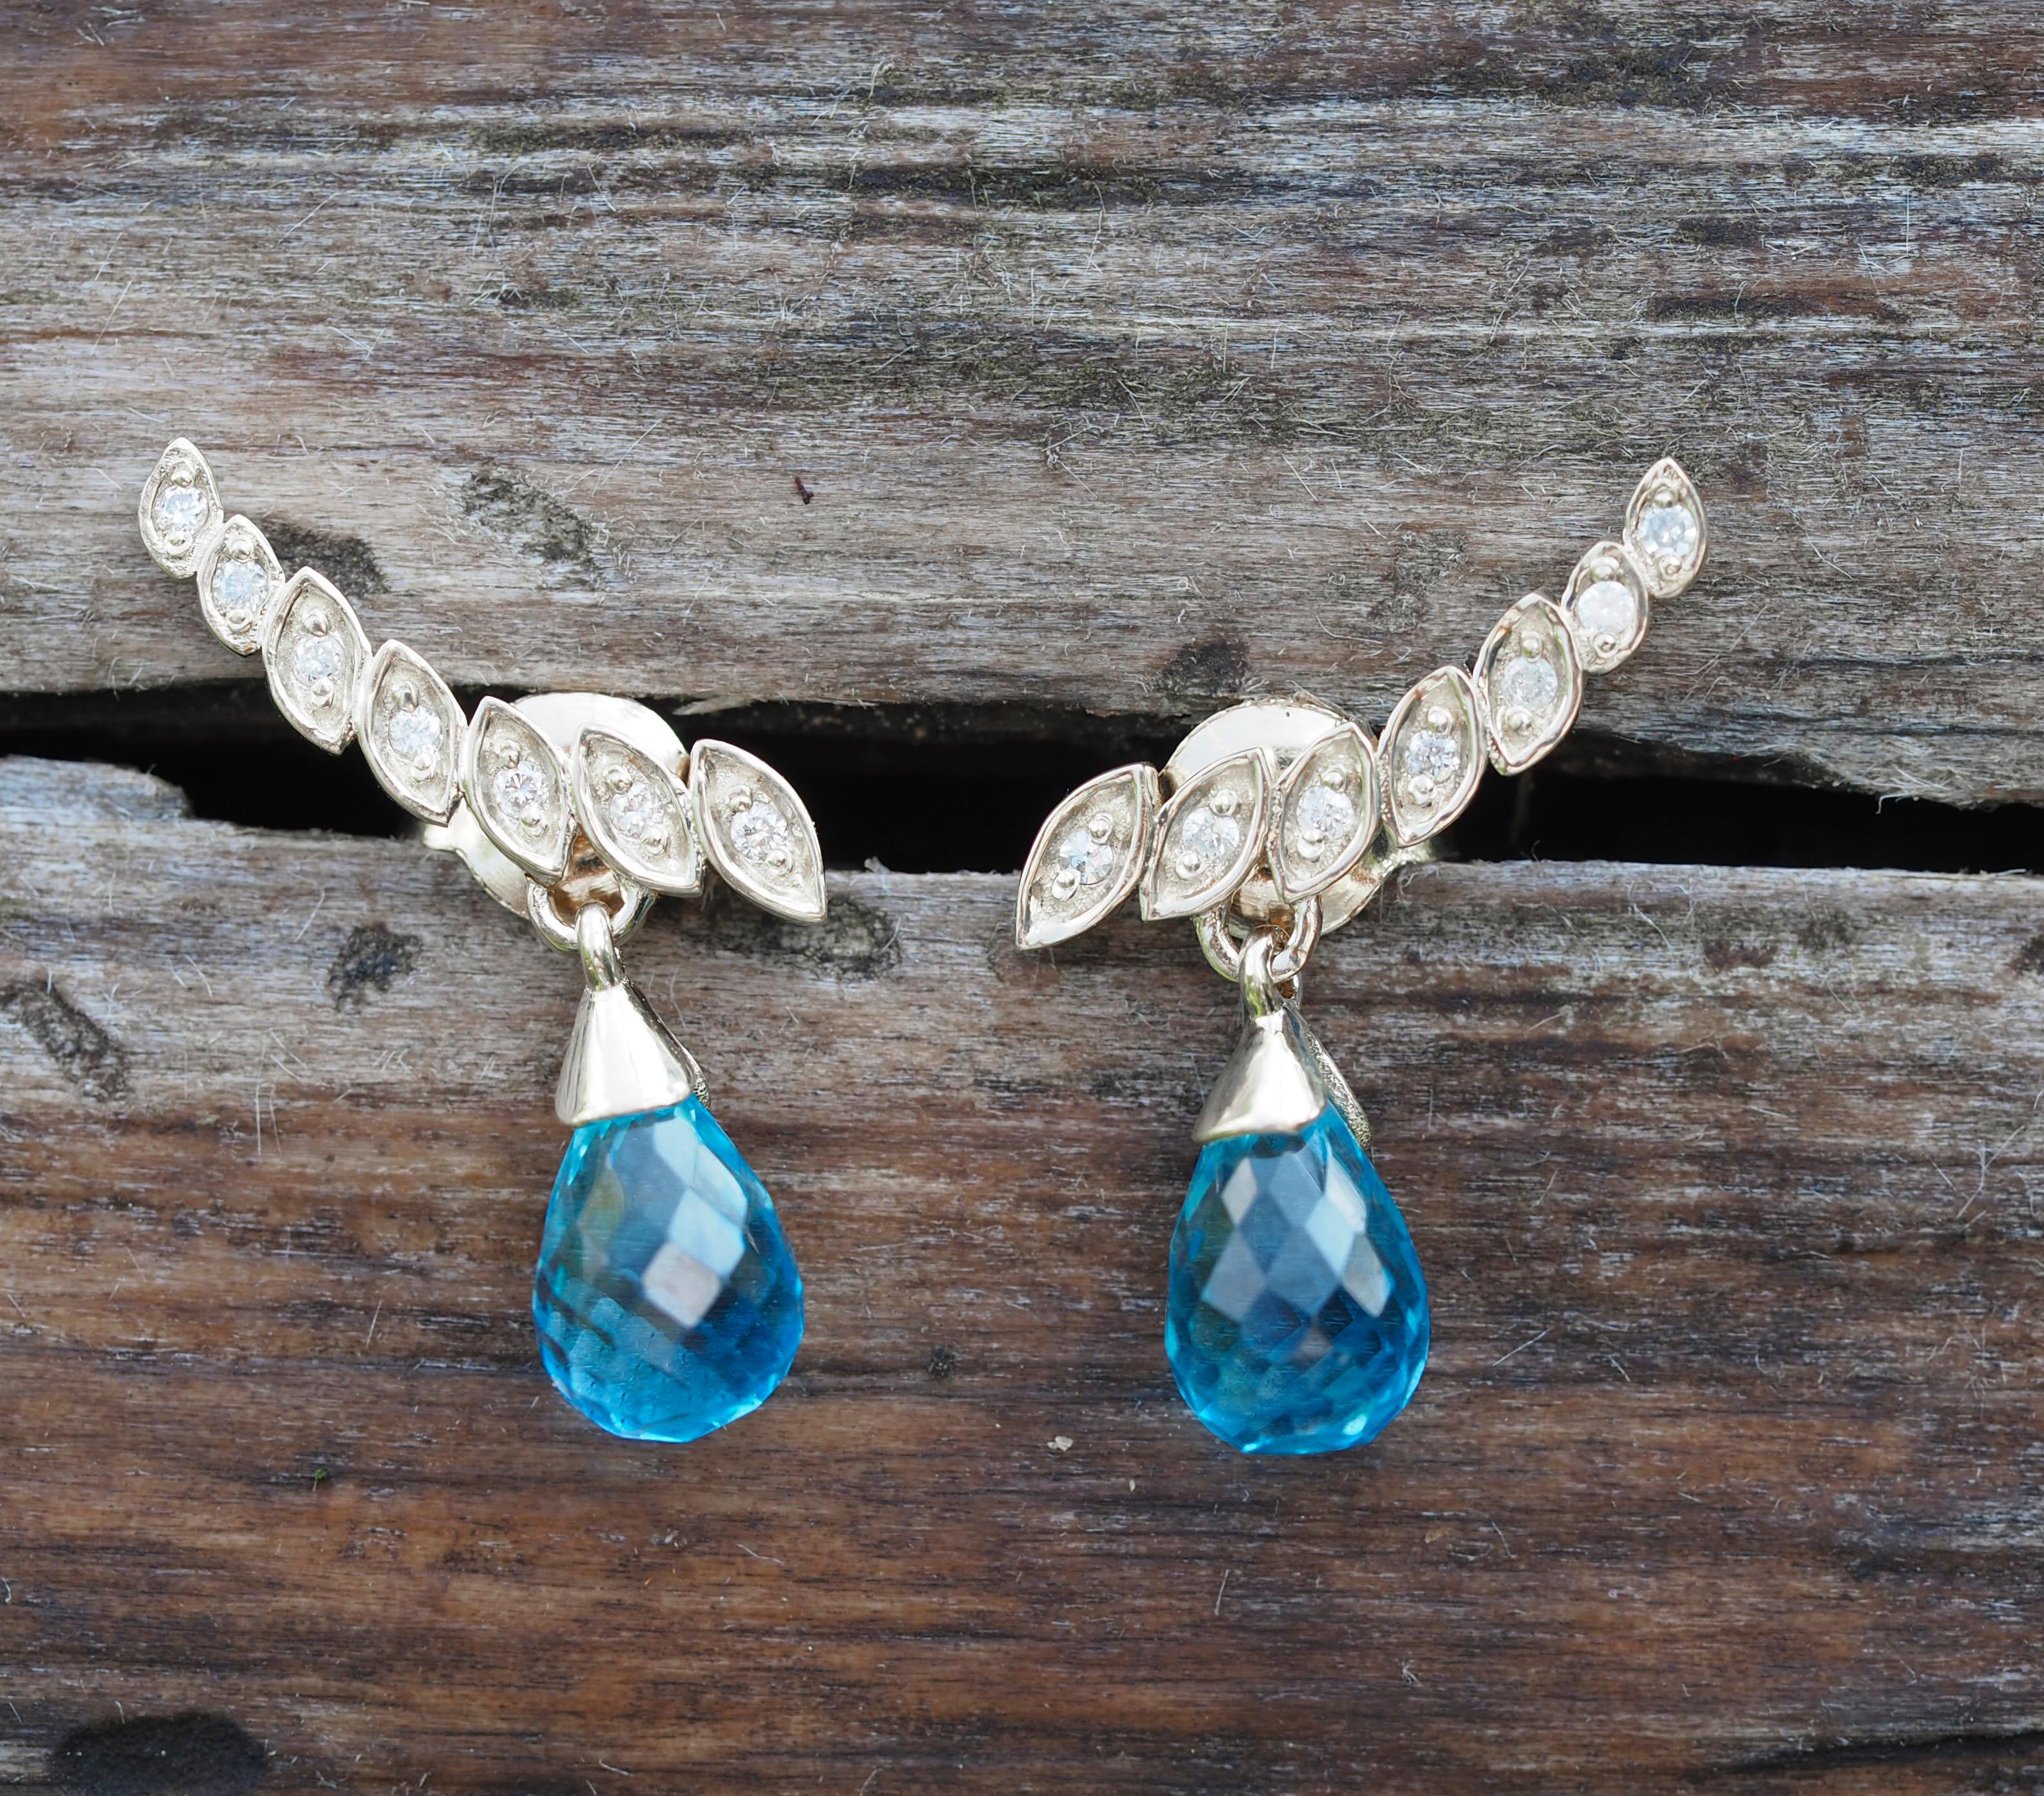 Briolette topazes earrings studs in 14k gold. 
Topaz drop earrings. Statement topaz earrings. Everyday topaz earrings. Sky blue topaz earrings.

Total weight: 2.70 g.
Metal: 14k gold.
Size 16 x 10 mm.

Central stones: Topazs - 2 pieces
Cut: